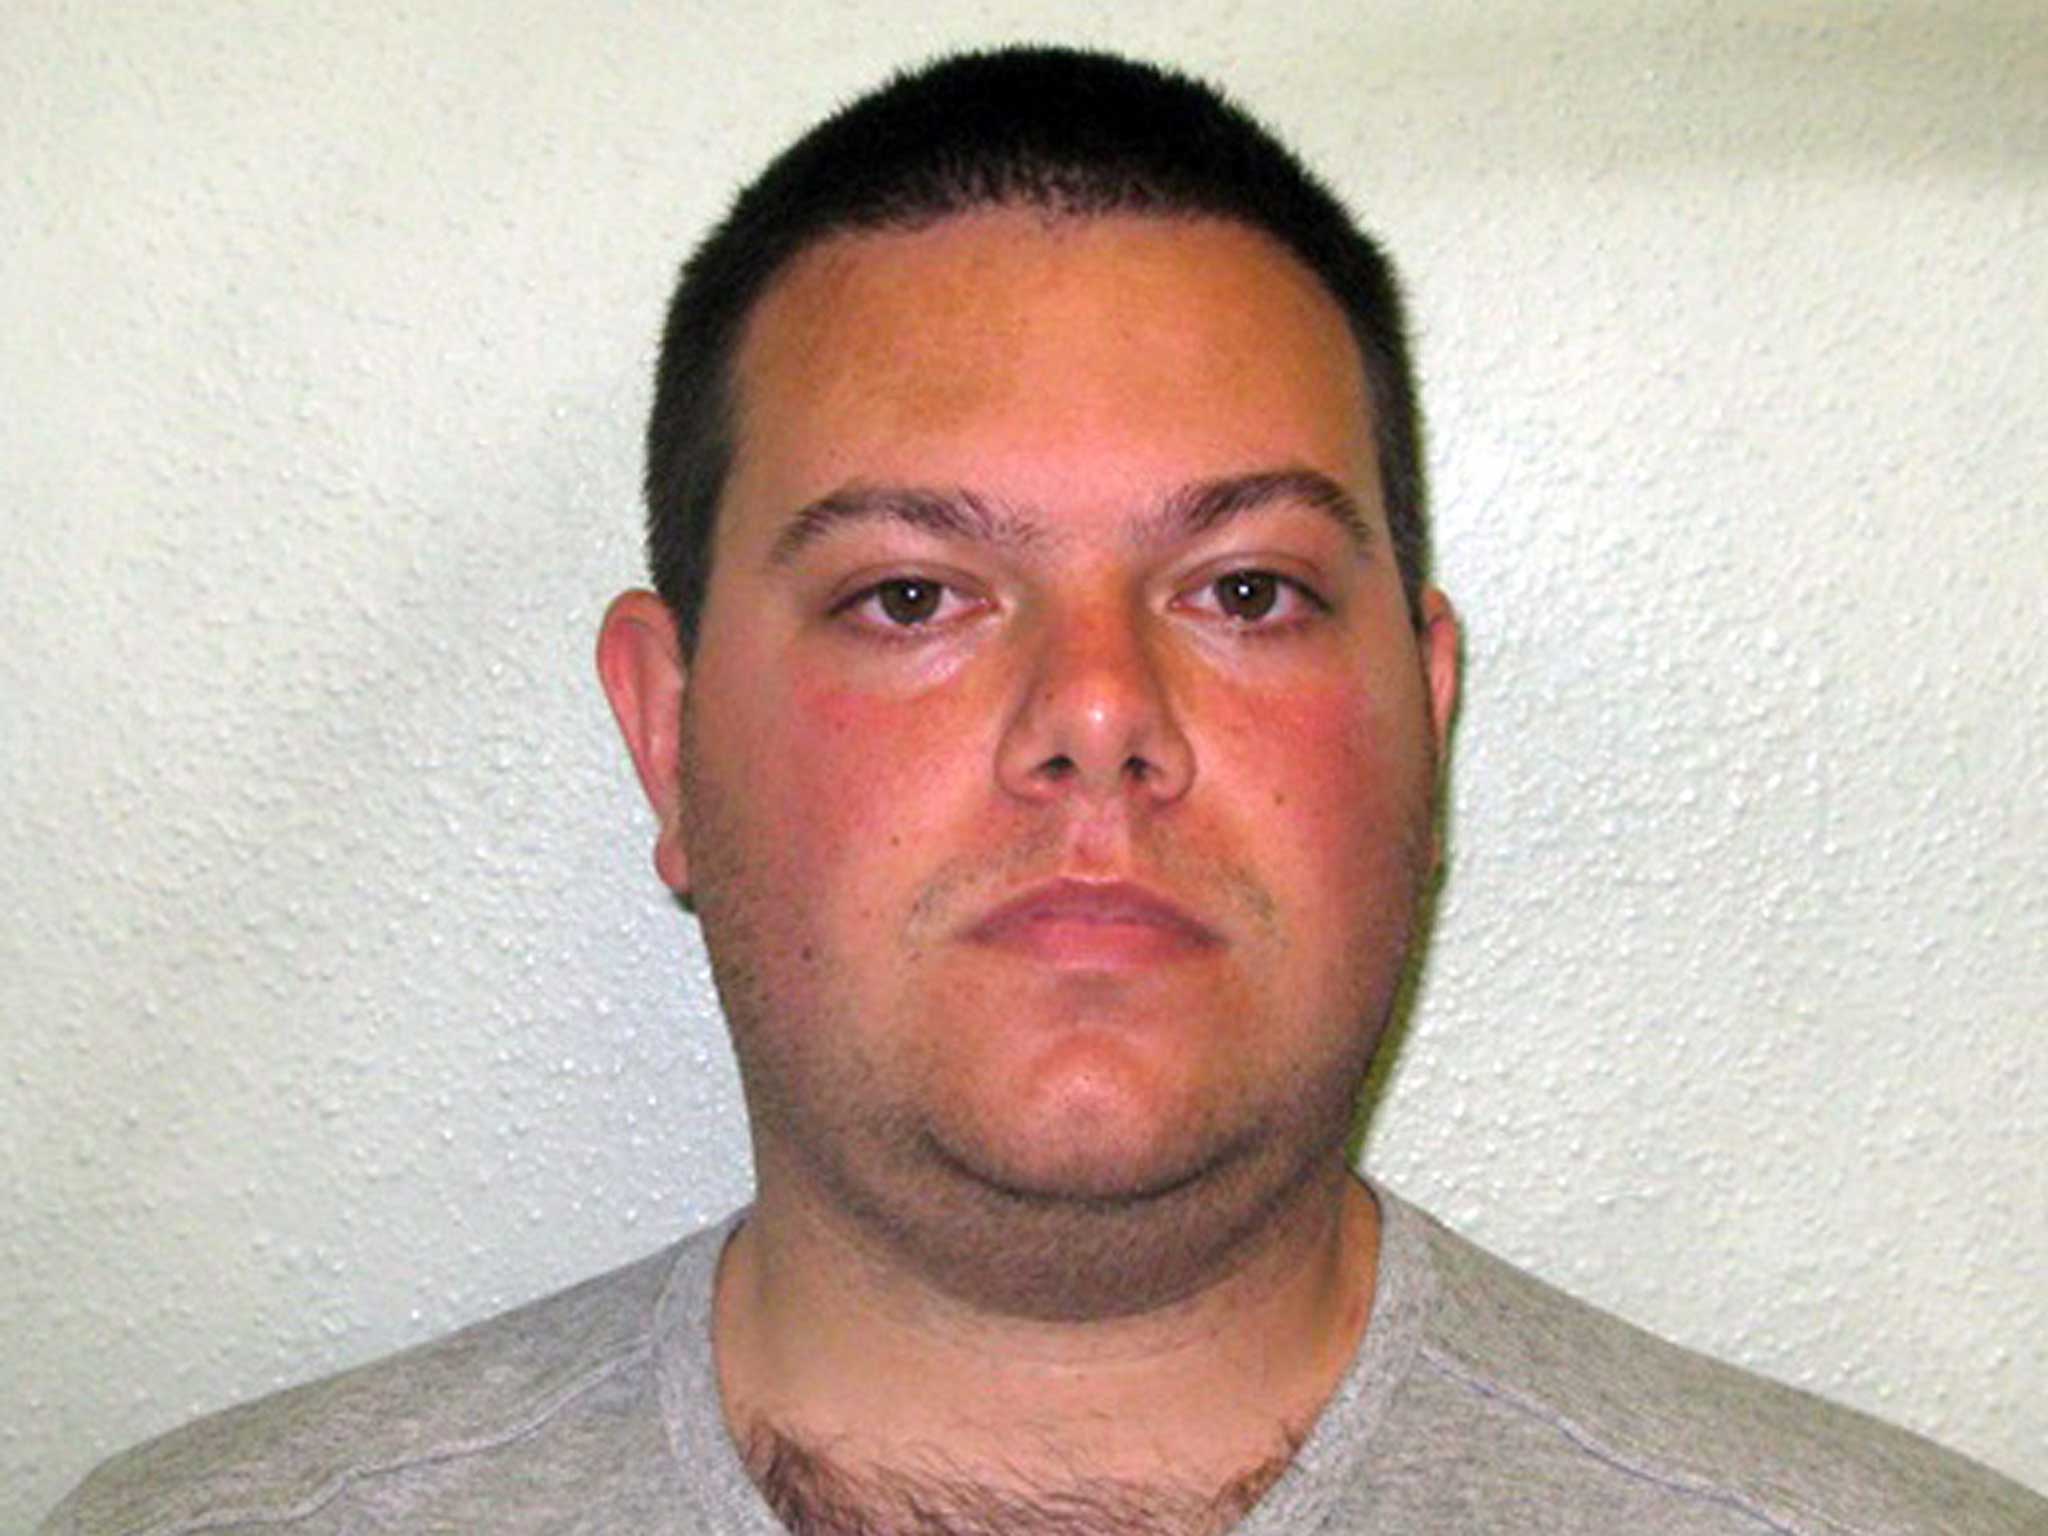 Billy Wheatley, a former PCSO with the Metropolitan Police who has been jailed for five-and-a-half years after admitting a catalogue of sex offences